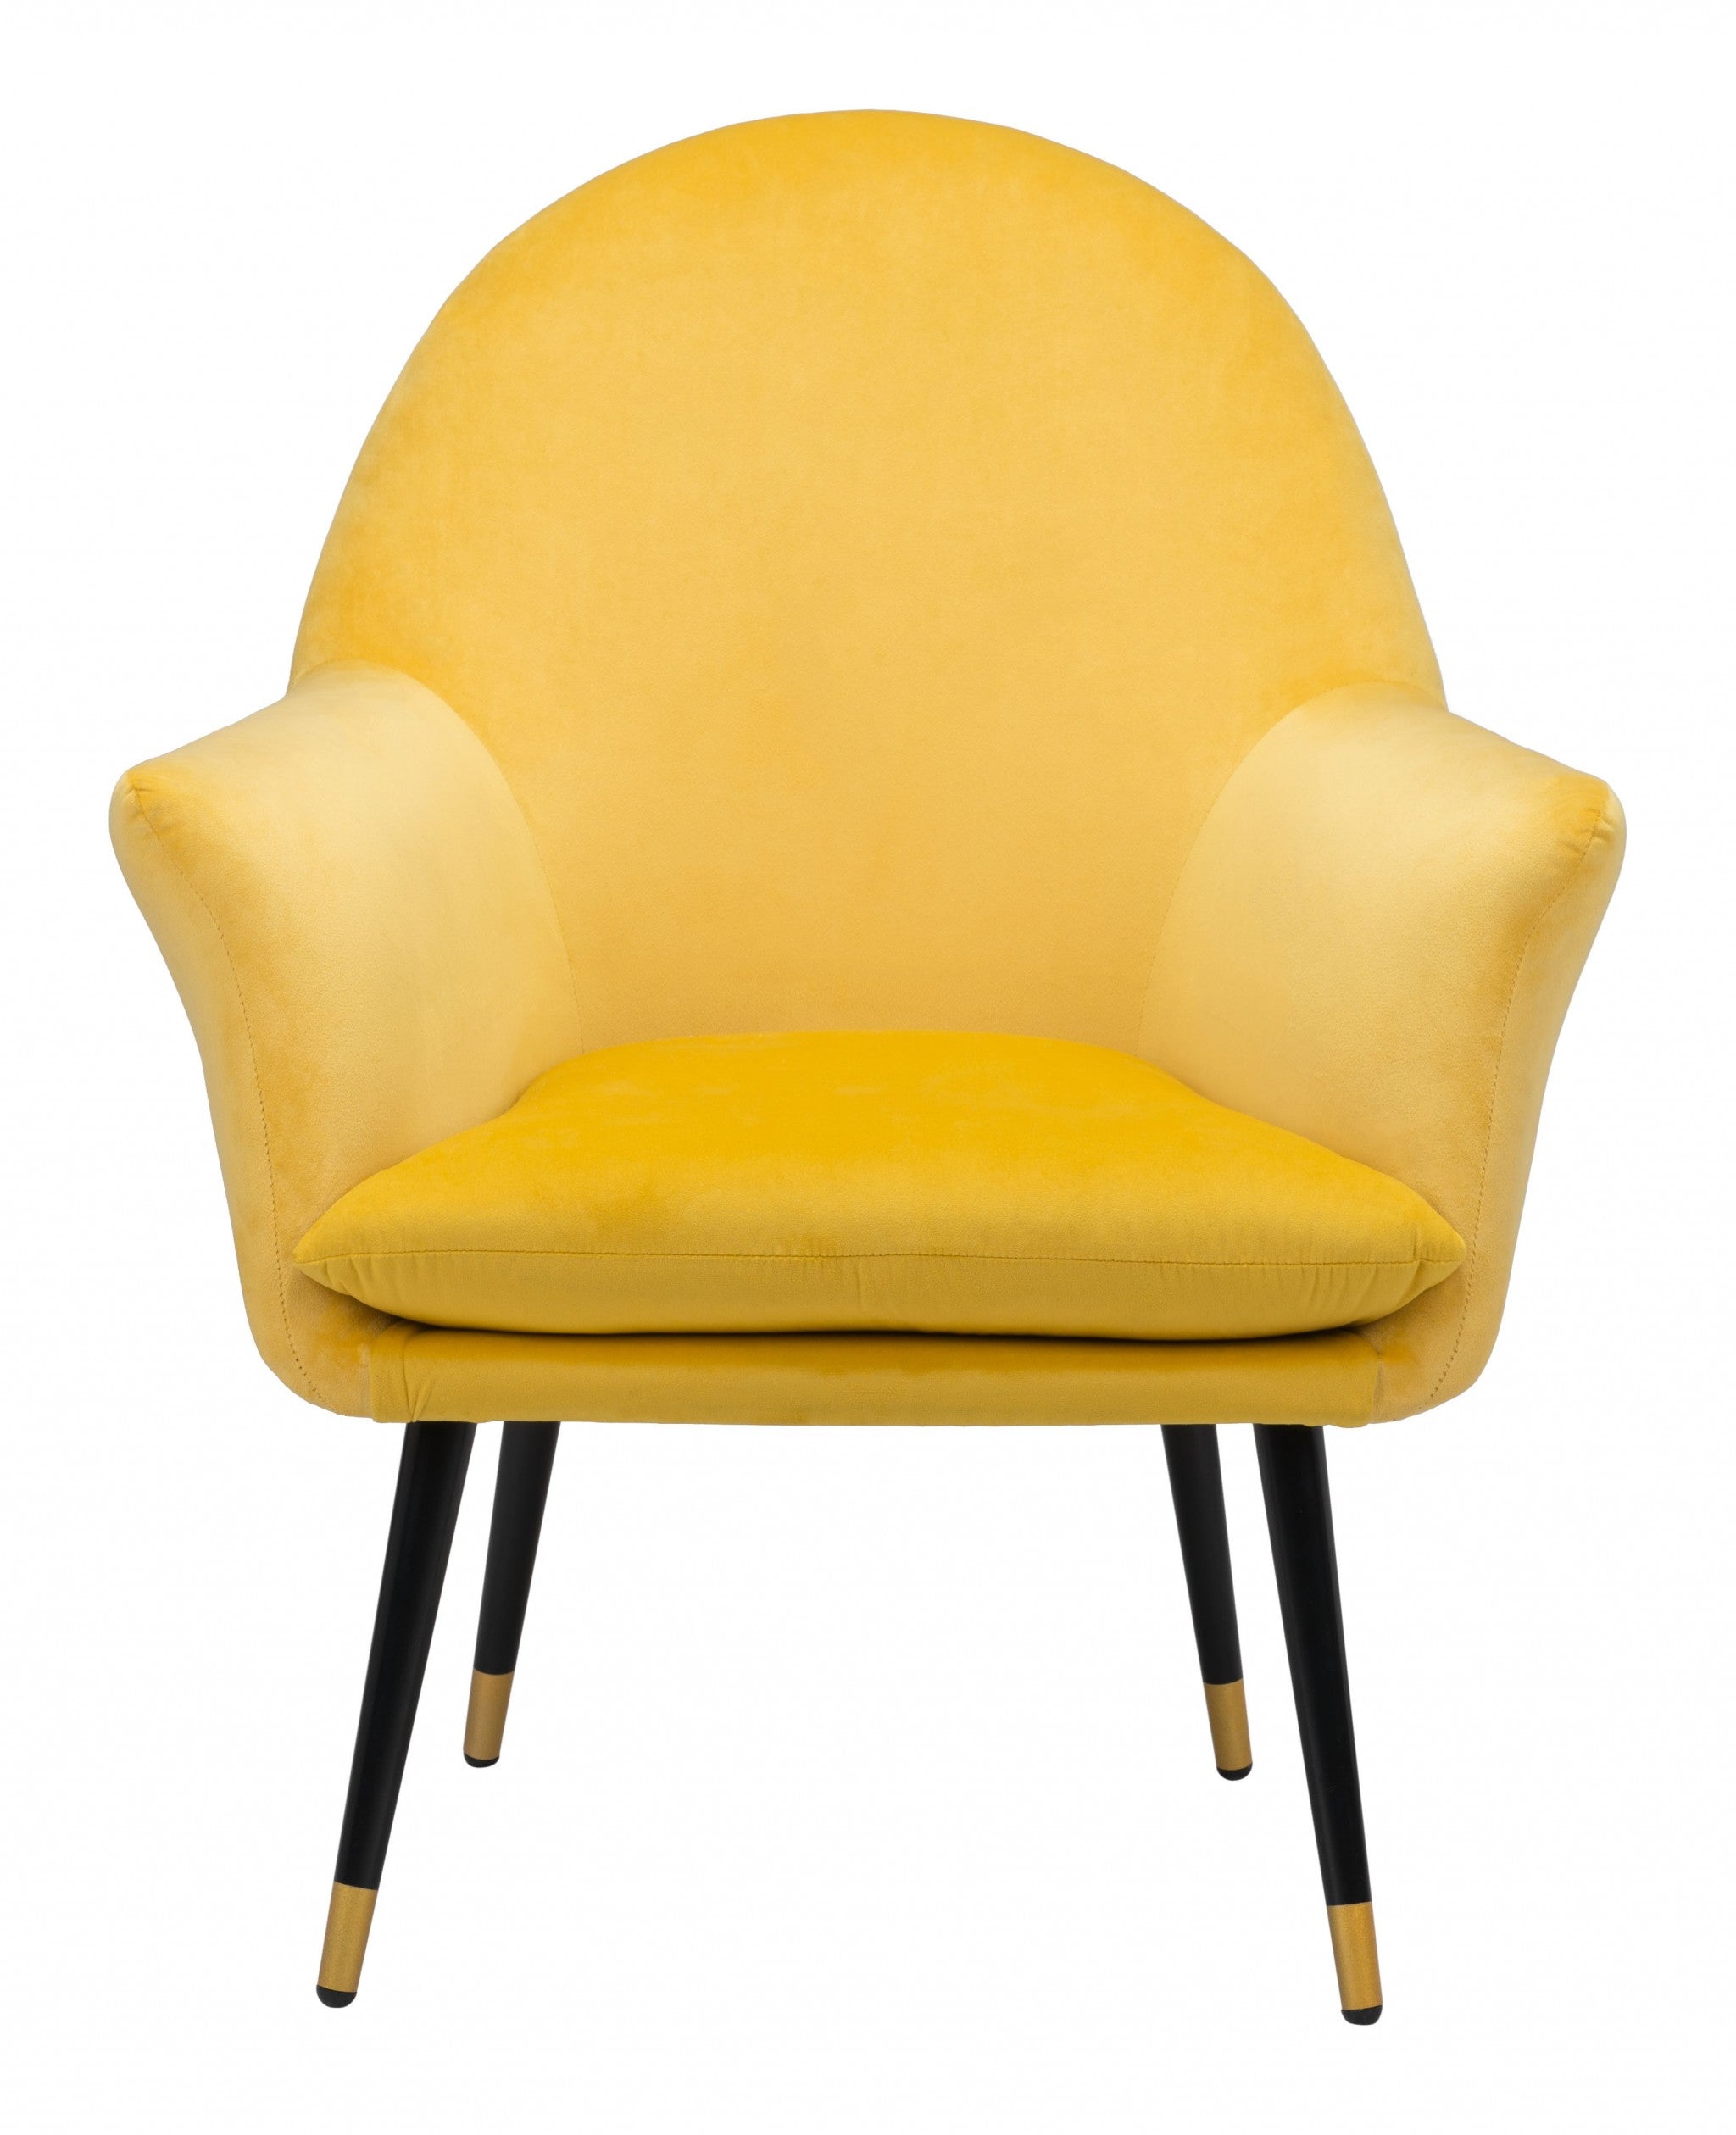 30" Yellow And Gold Velvet Arm Chair